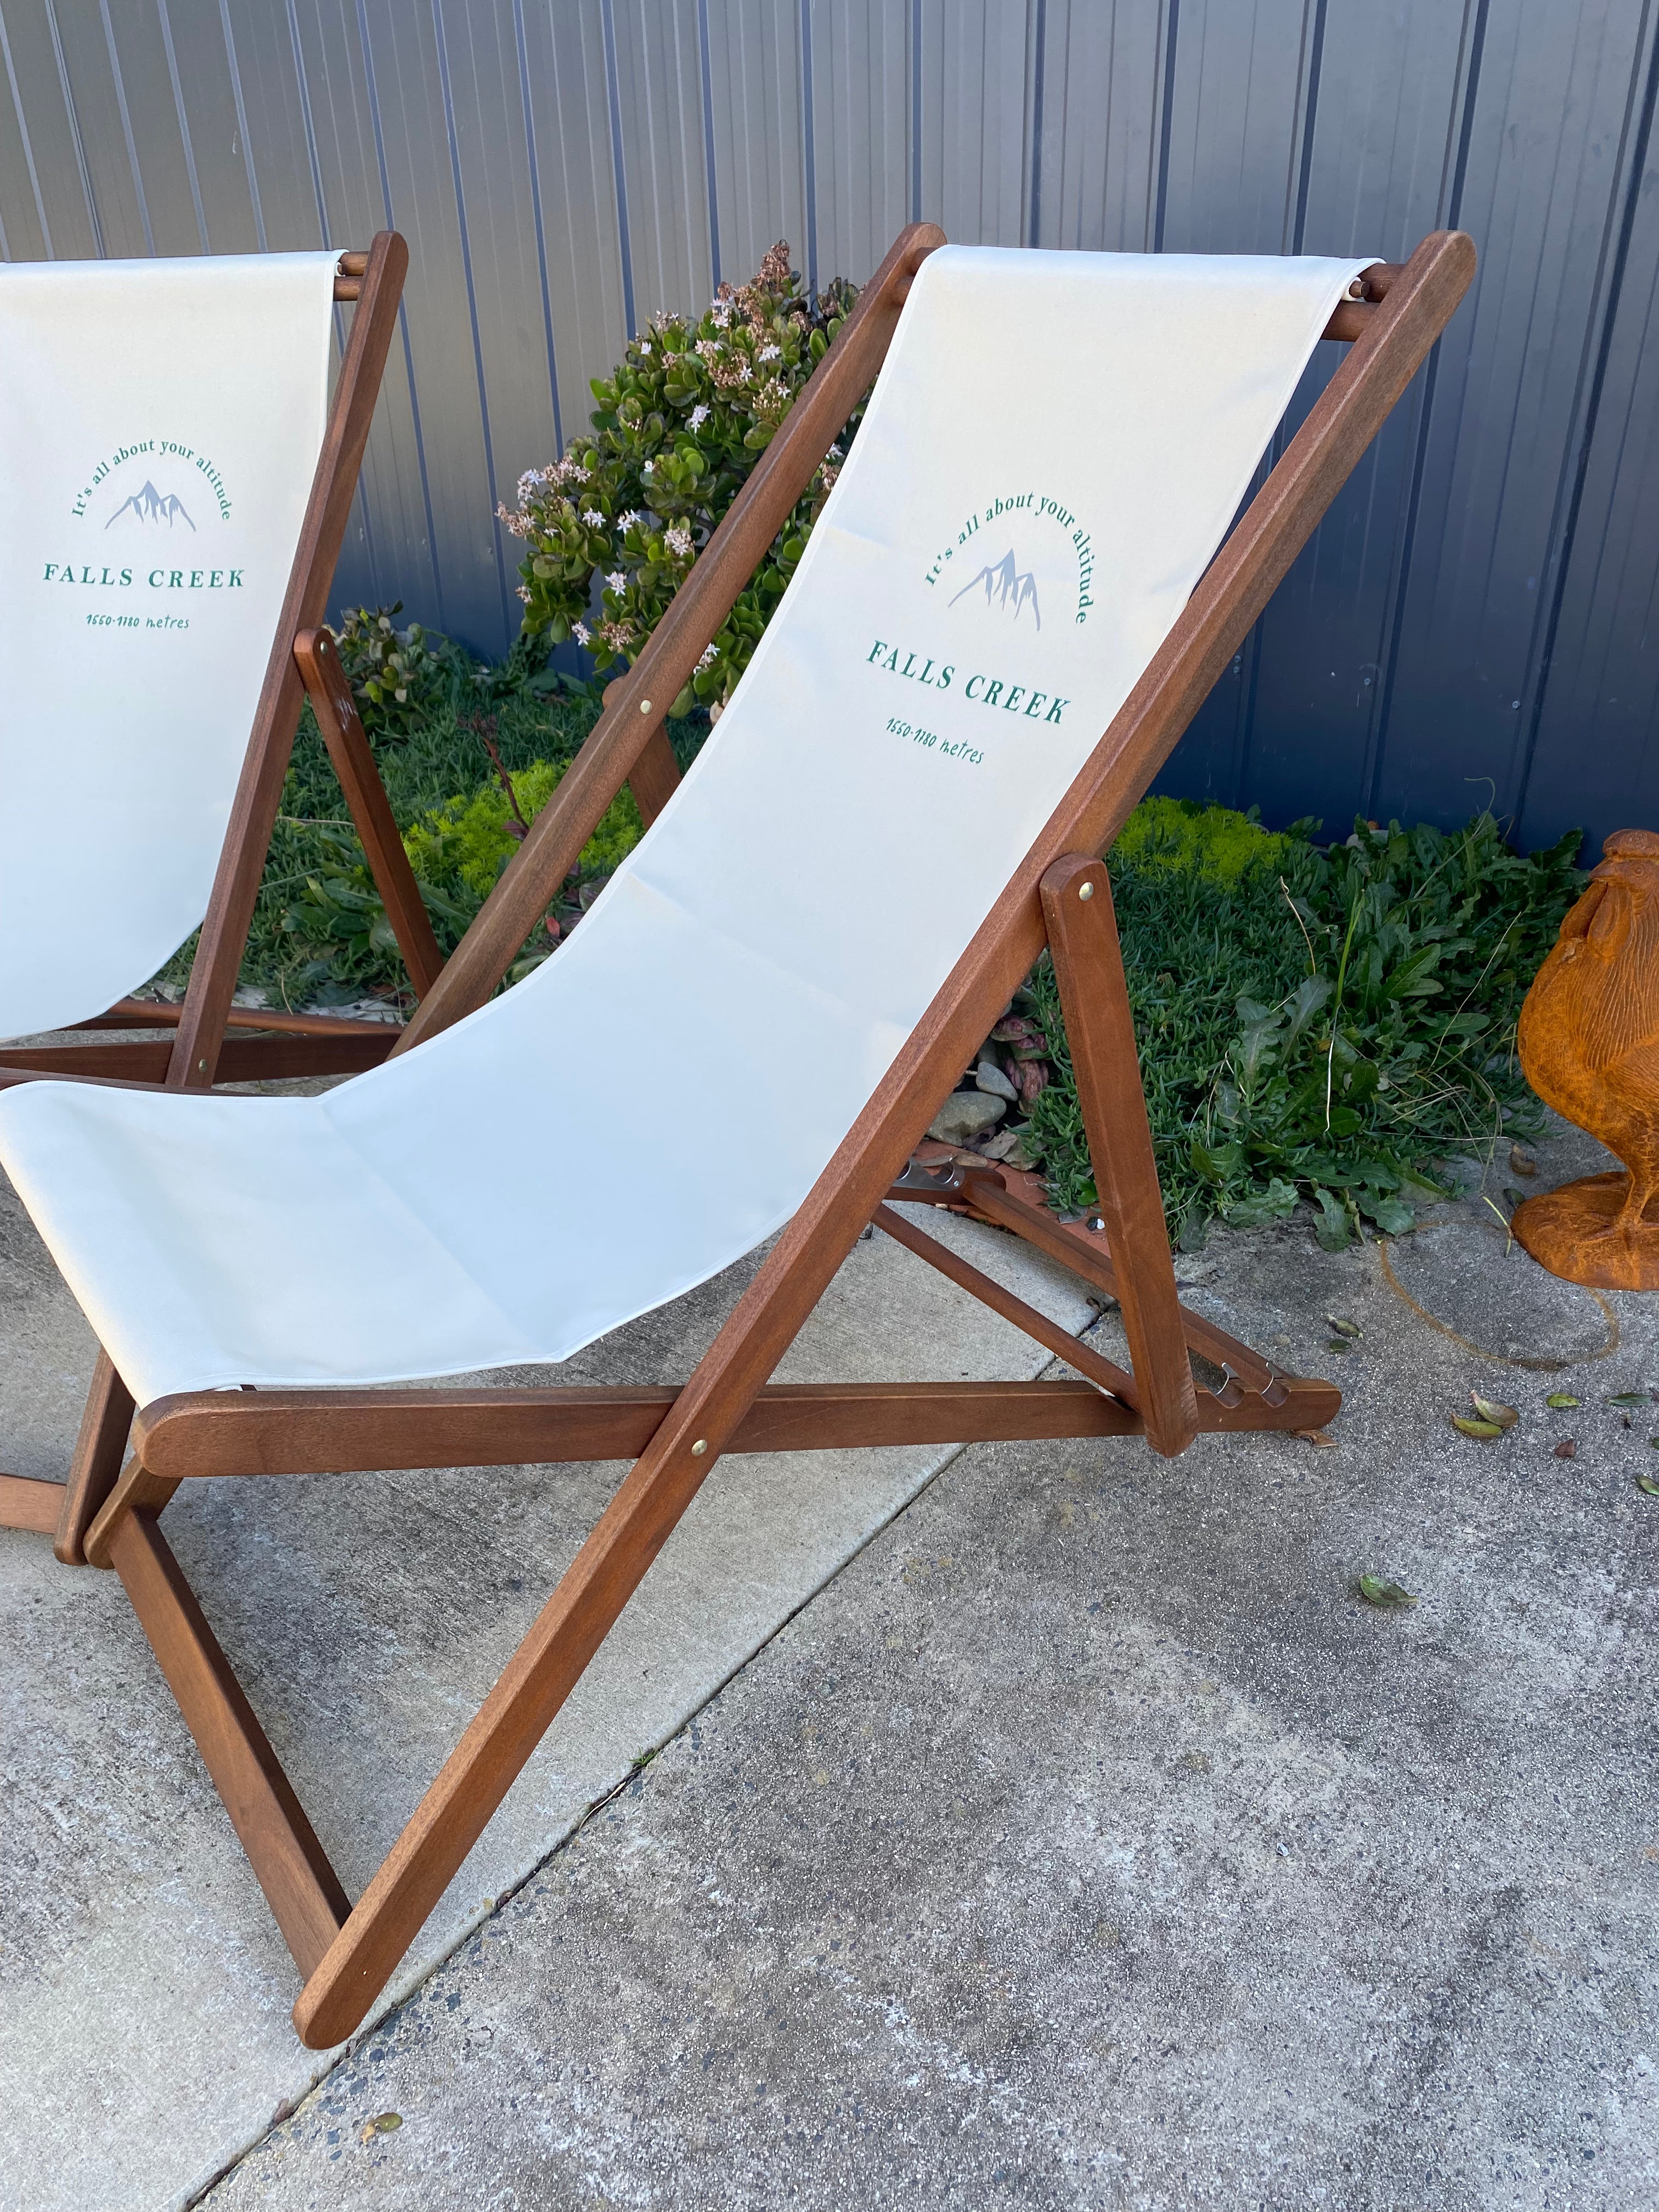 Falls Creek 'It’s all about your altitude' Deck Chair